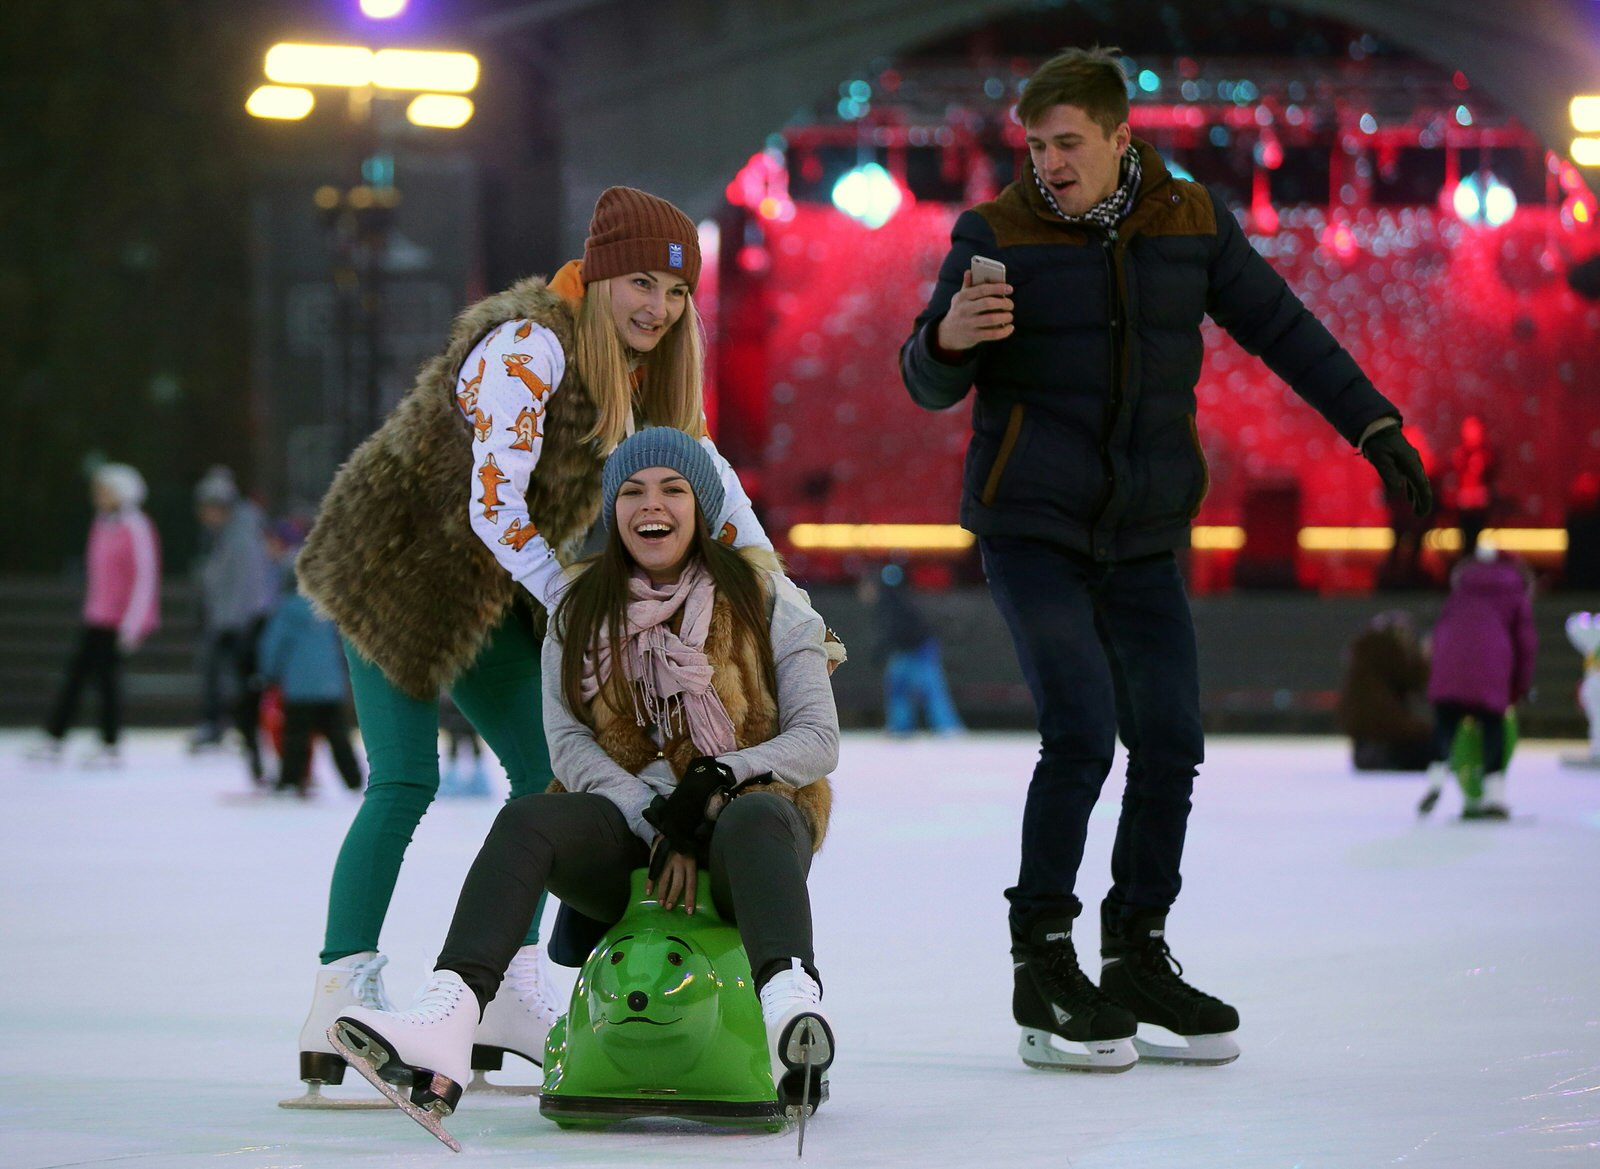 Getting to grips with the New Holland Island ice rink © Peter Kovalev / Getty Images